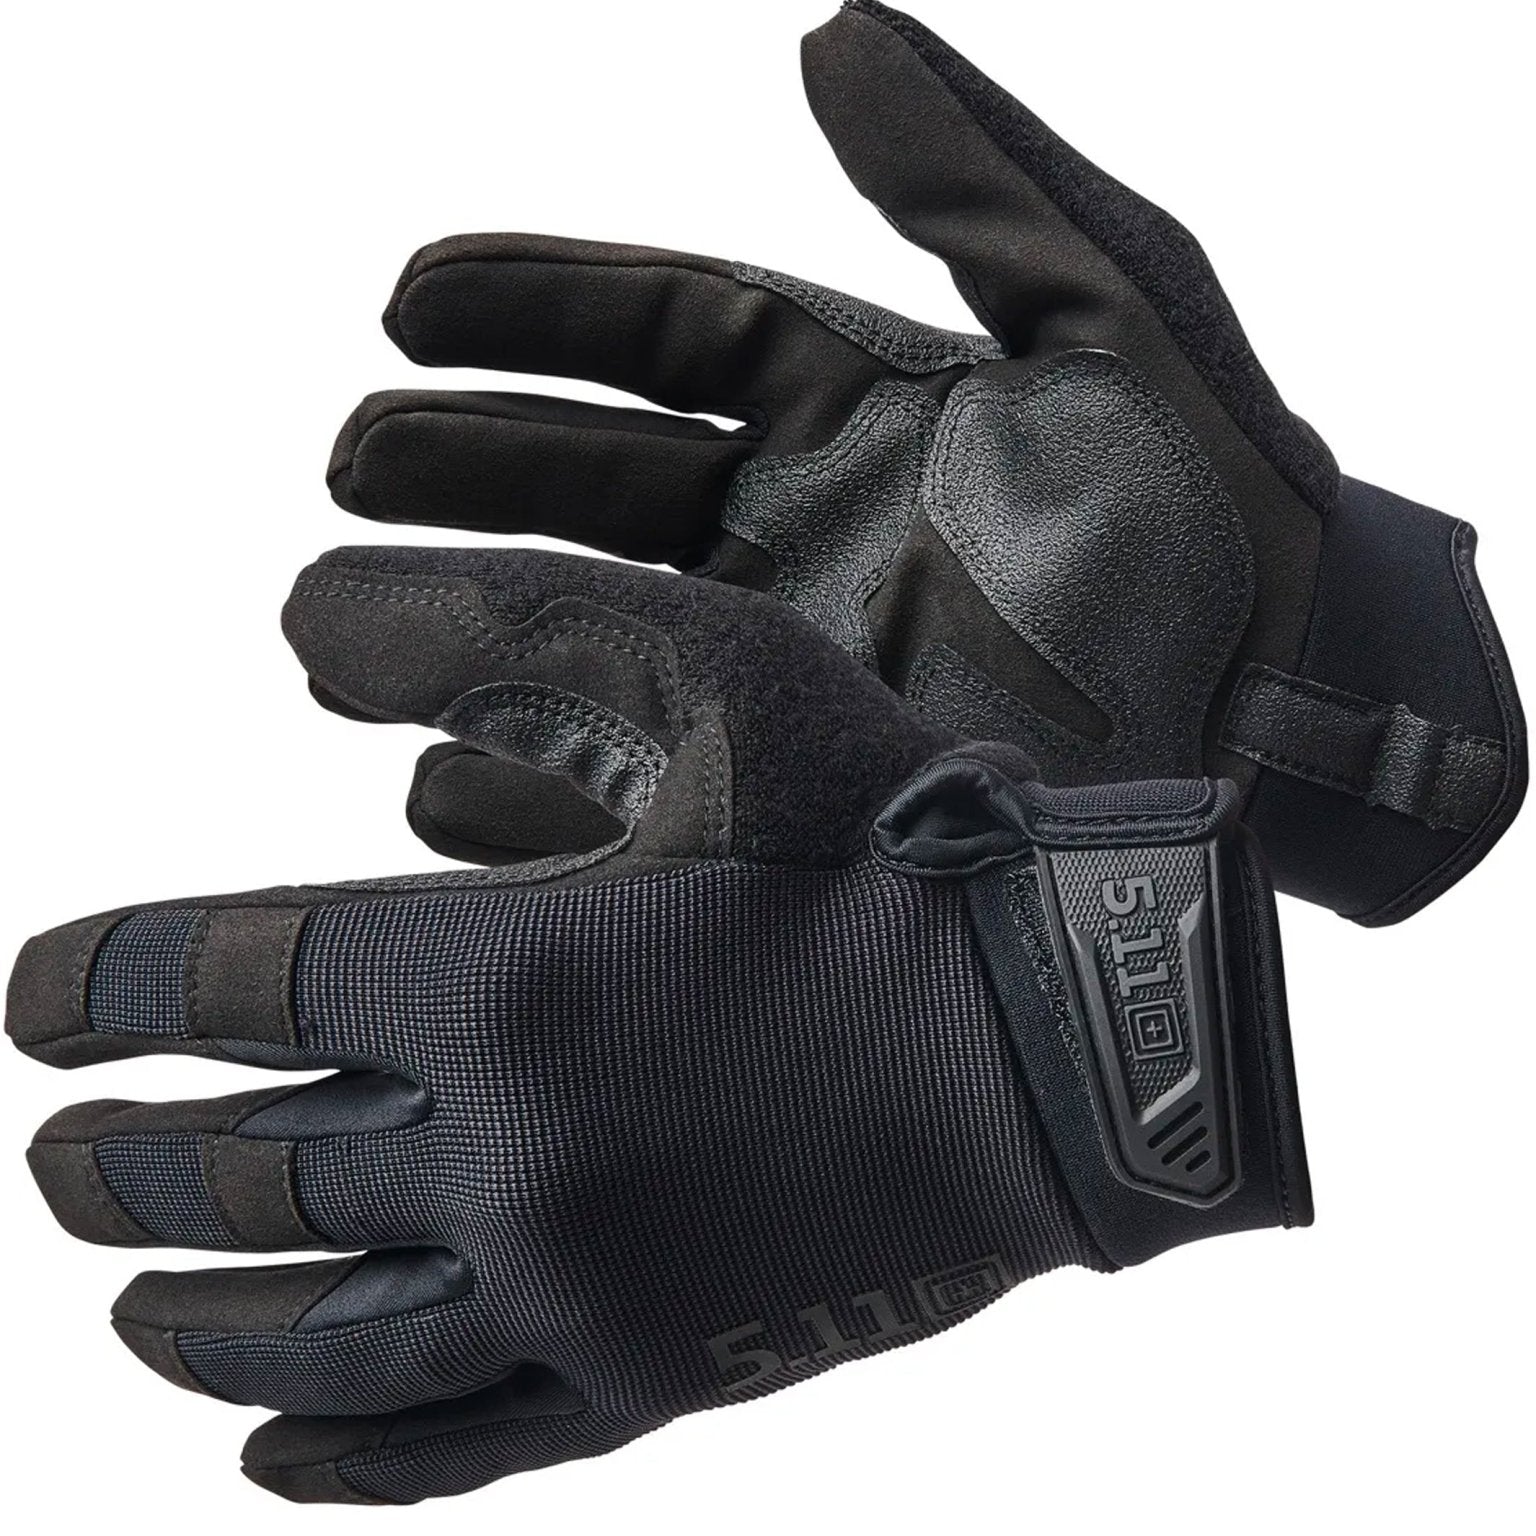 4elementsclothing5.11 Tactical5.11 Tactical - 5.11 TAC A4 Glove - Touchscreen synthetic suede pal, with grip gloves, Nylon TAA Compliant - EN388:2016 - 2121X; EN ISO 21420 - Style 59380Gloves59380-019-S